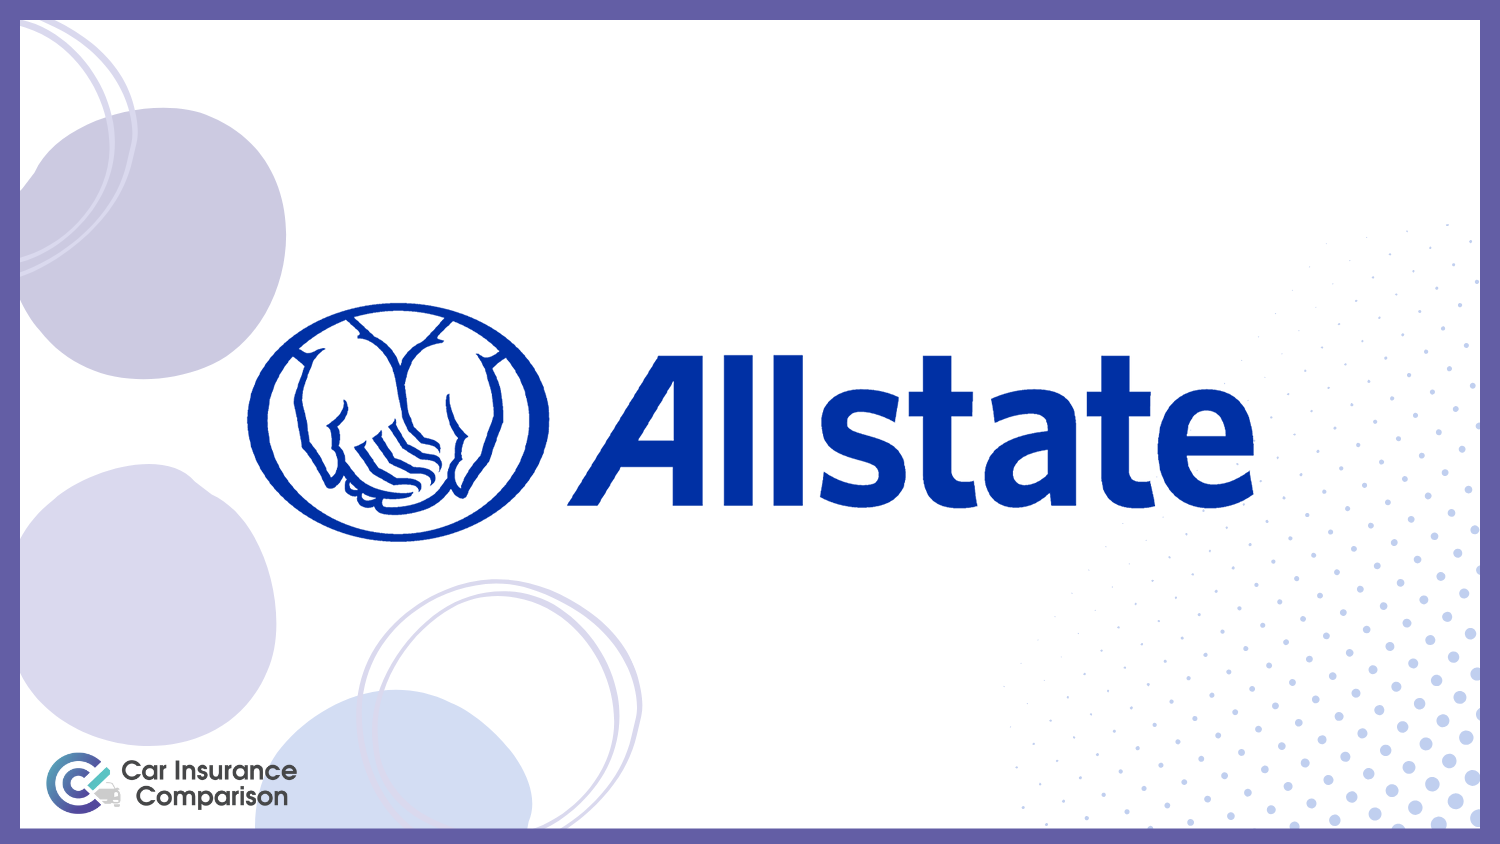 Allstate: Compare Best Commercial Car Insurance Companies